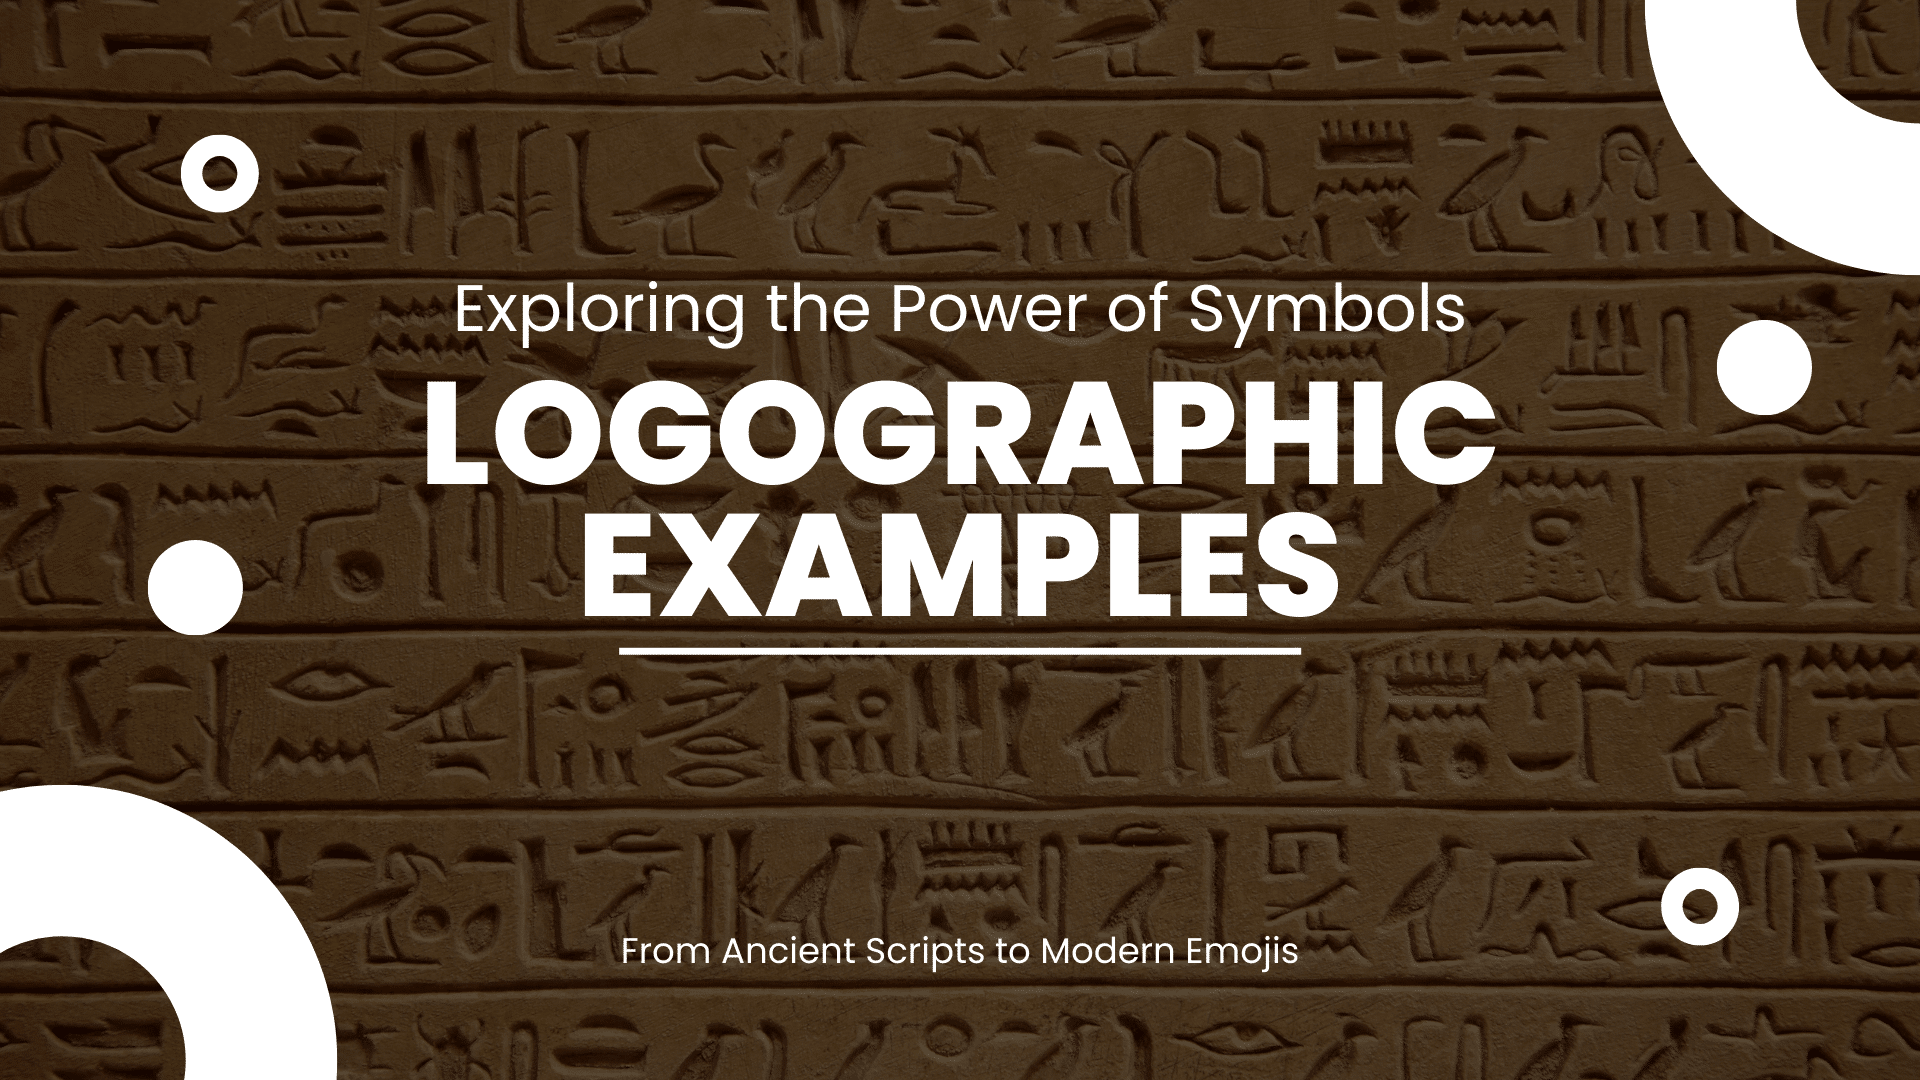 Logographic Examples